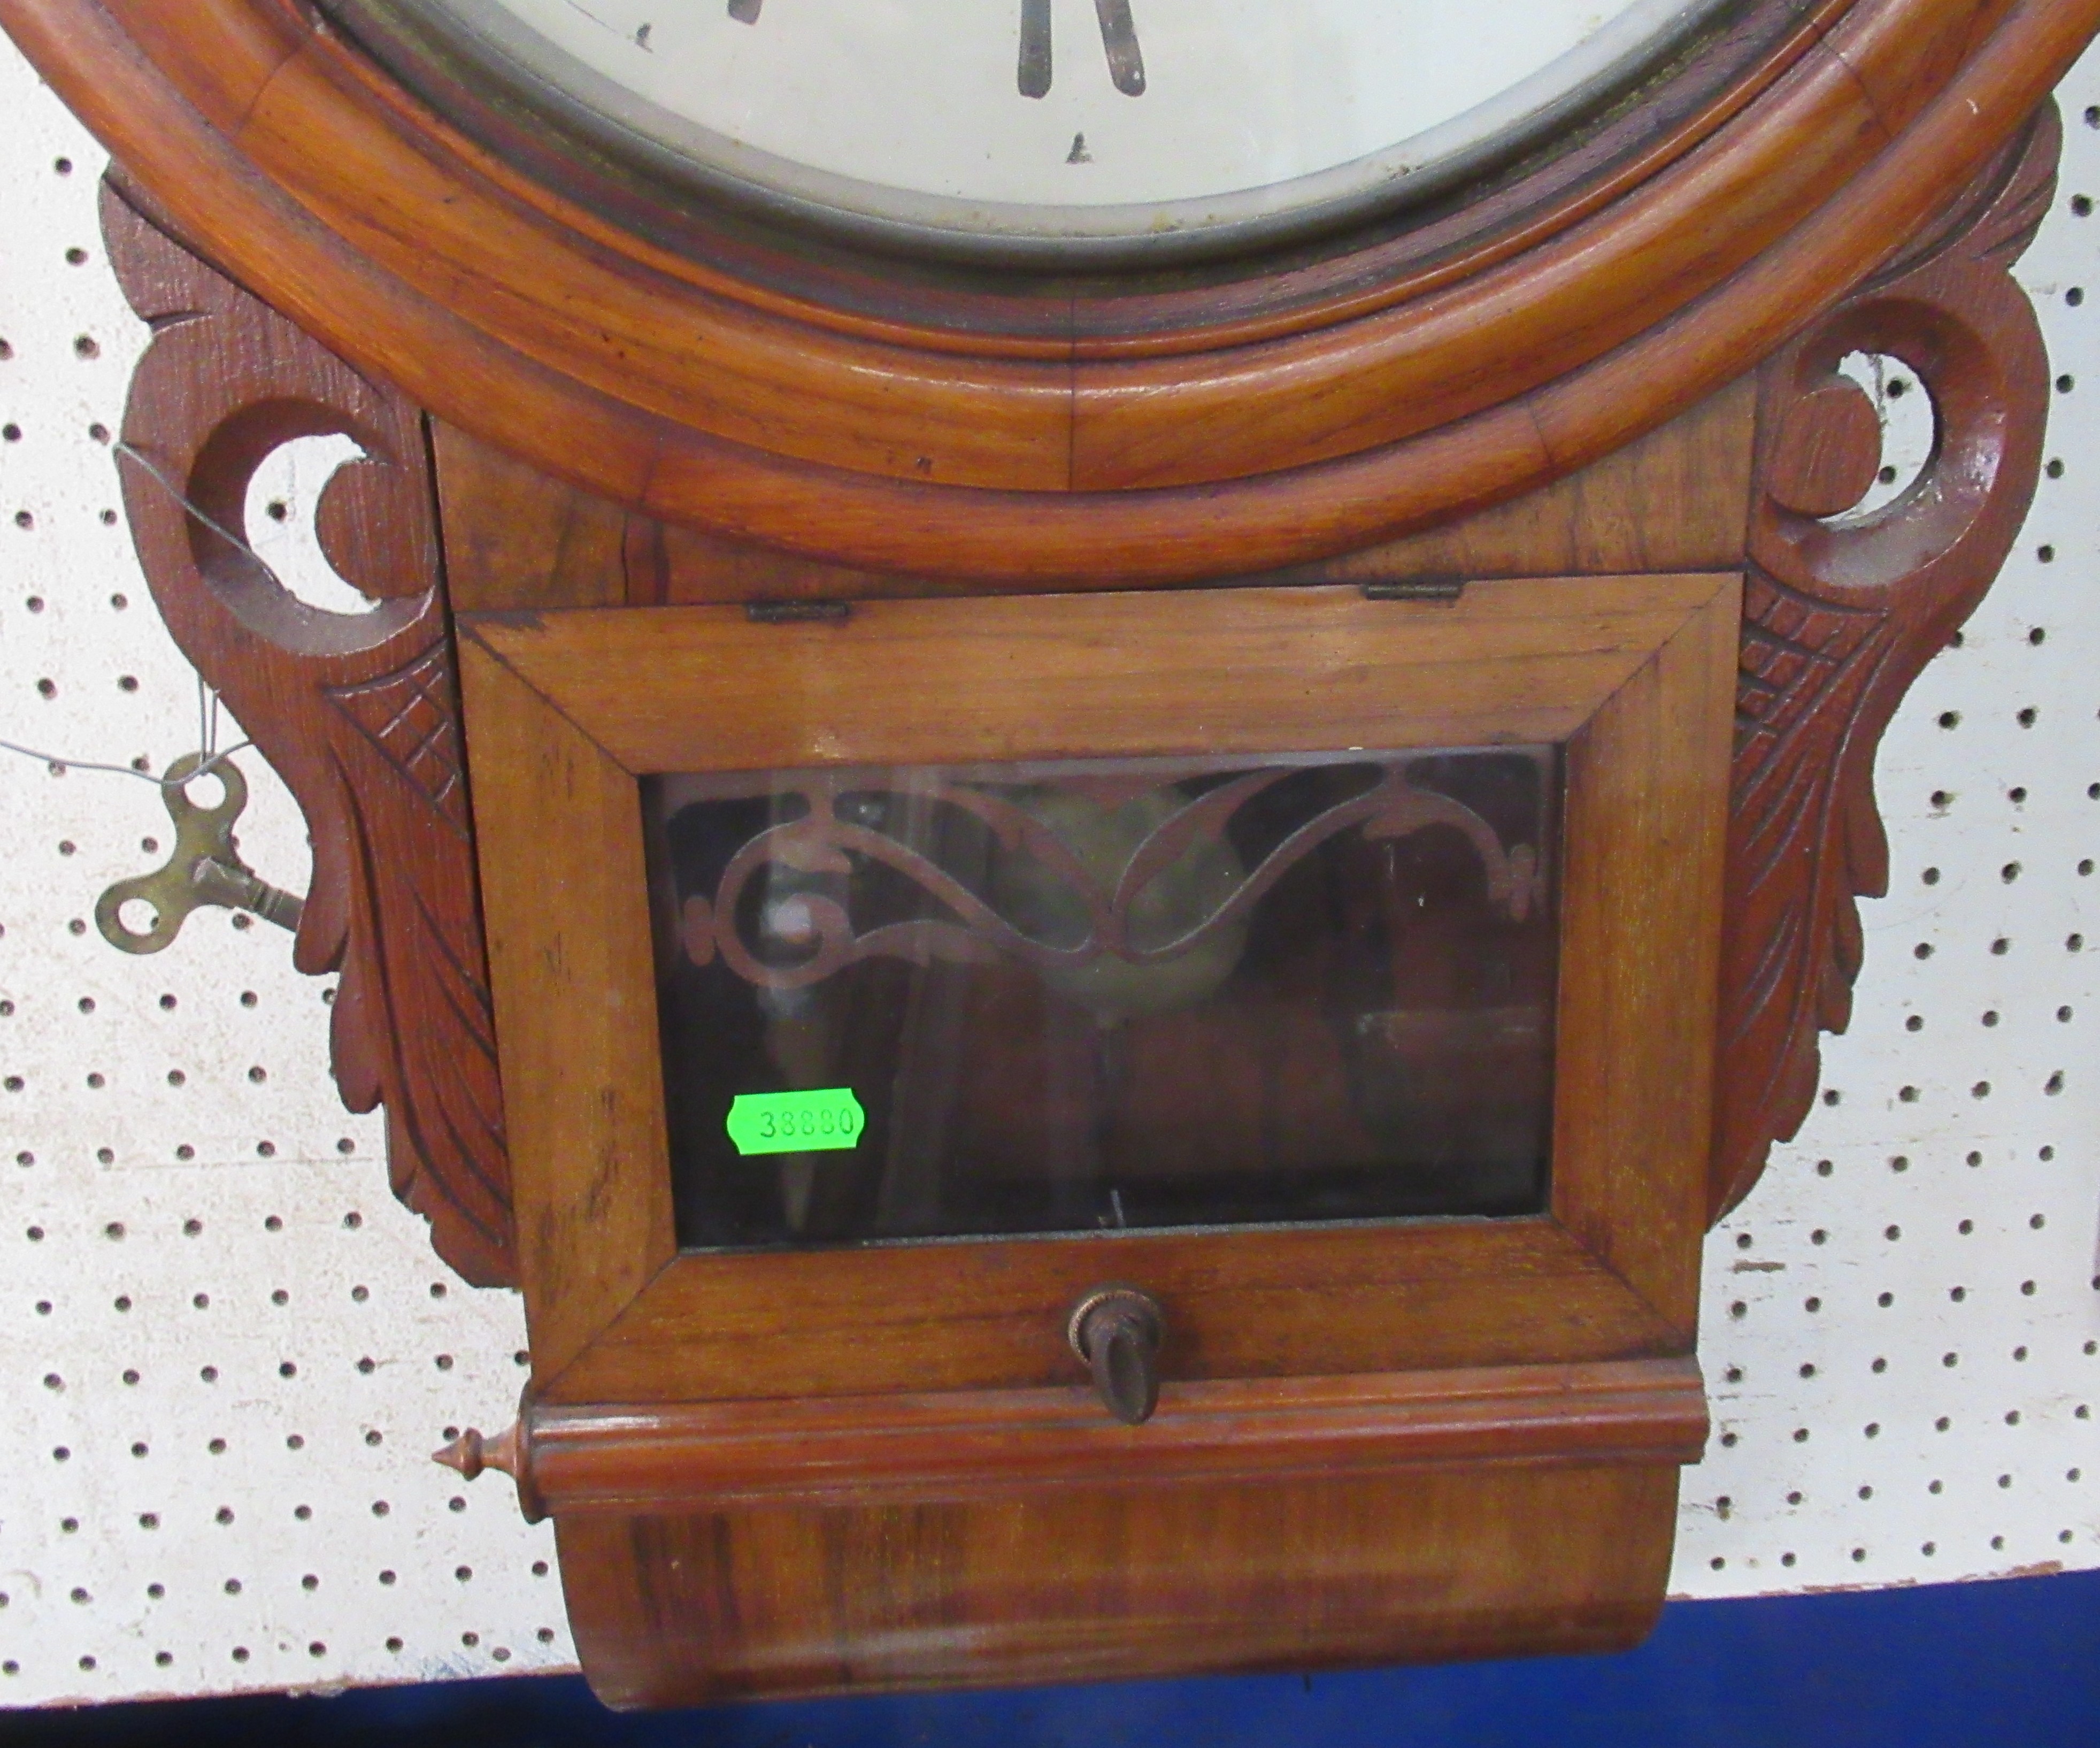 A 19th century rosewood drop dial wall clock - Image 2 of 2